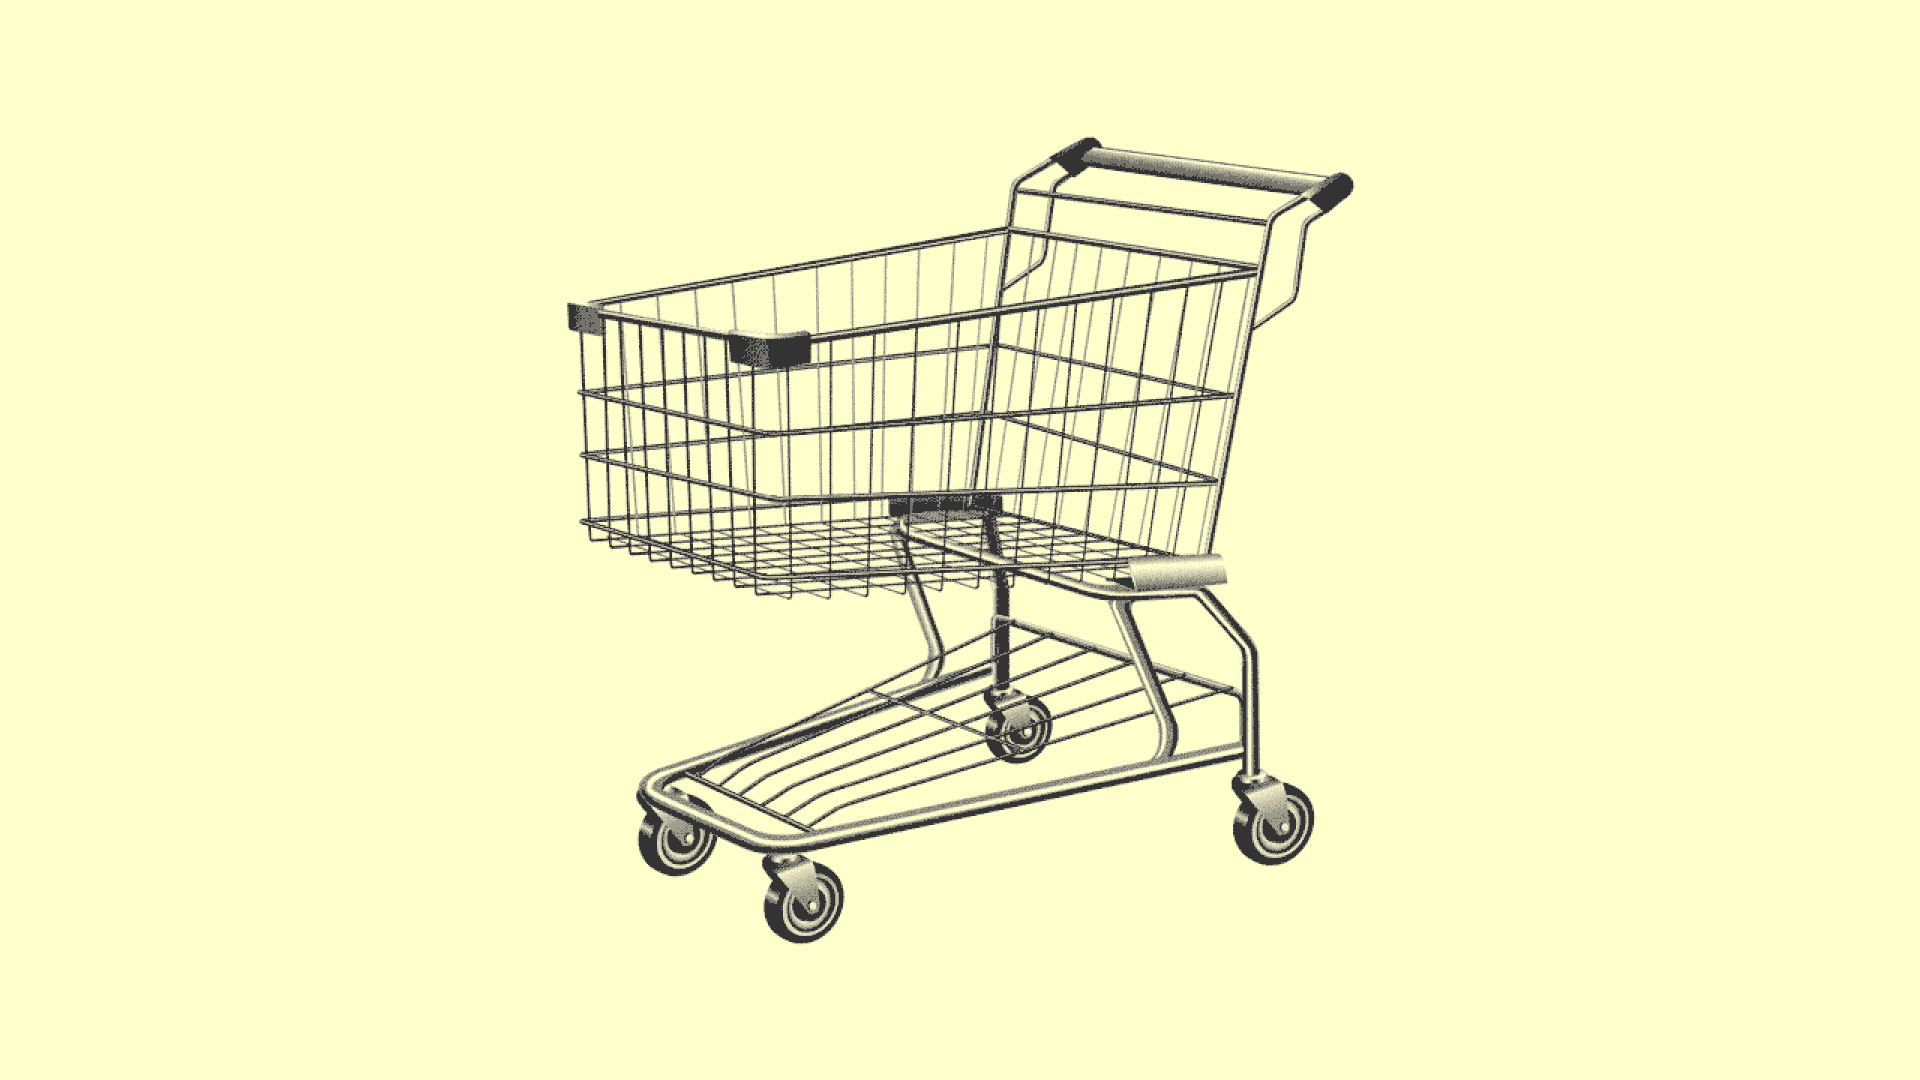  Illustration of a shopping cart in a whirlpool 